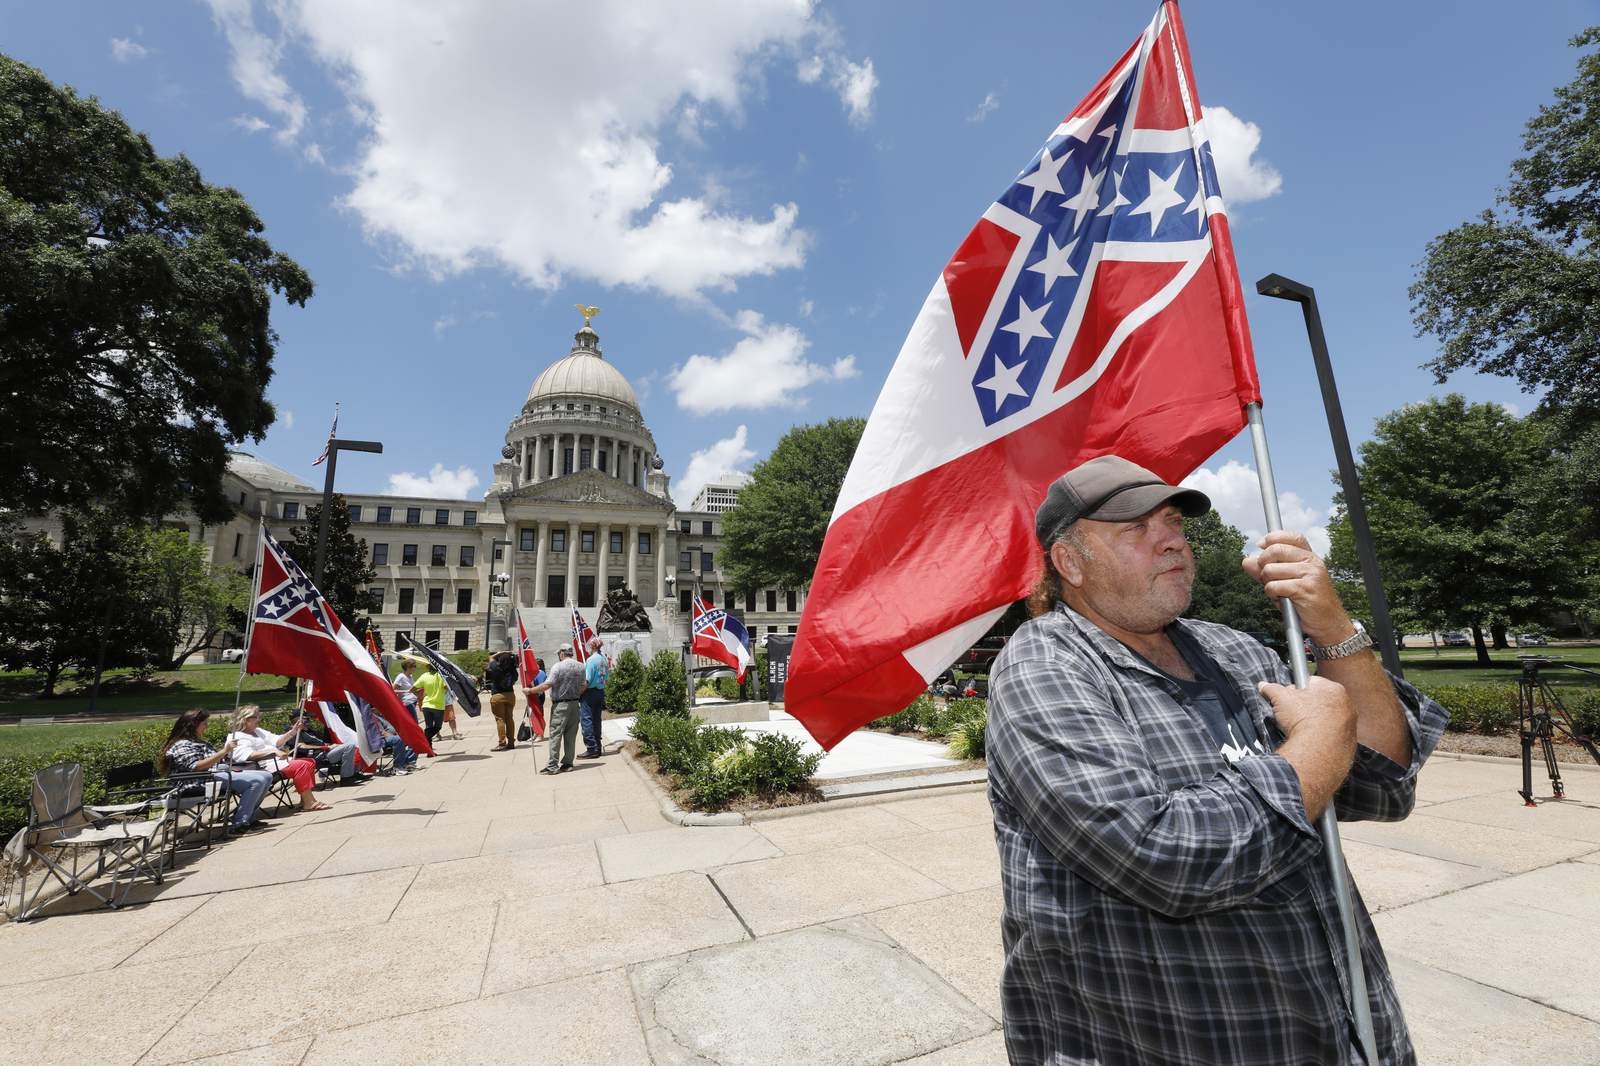 Mississippi surrenders Confederate symbol from state flag